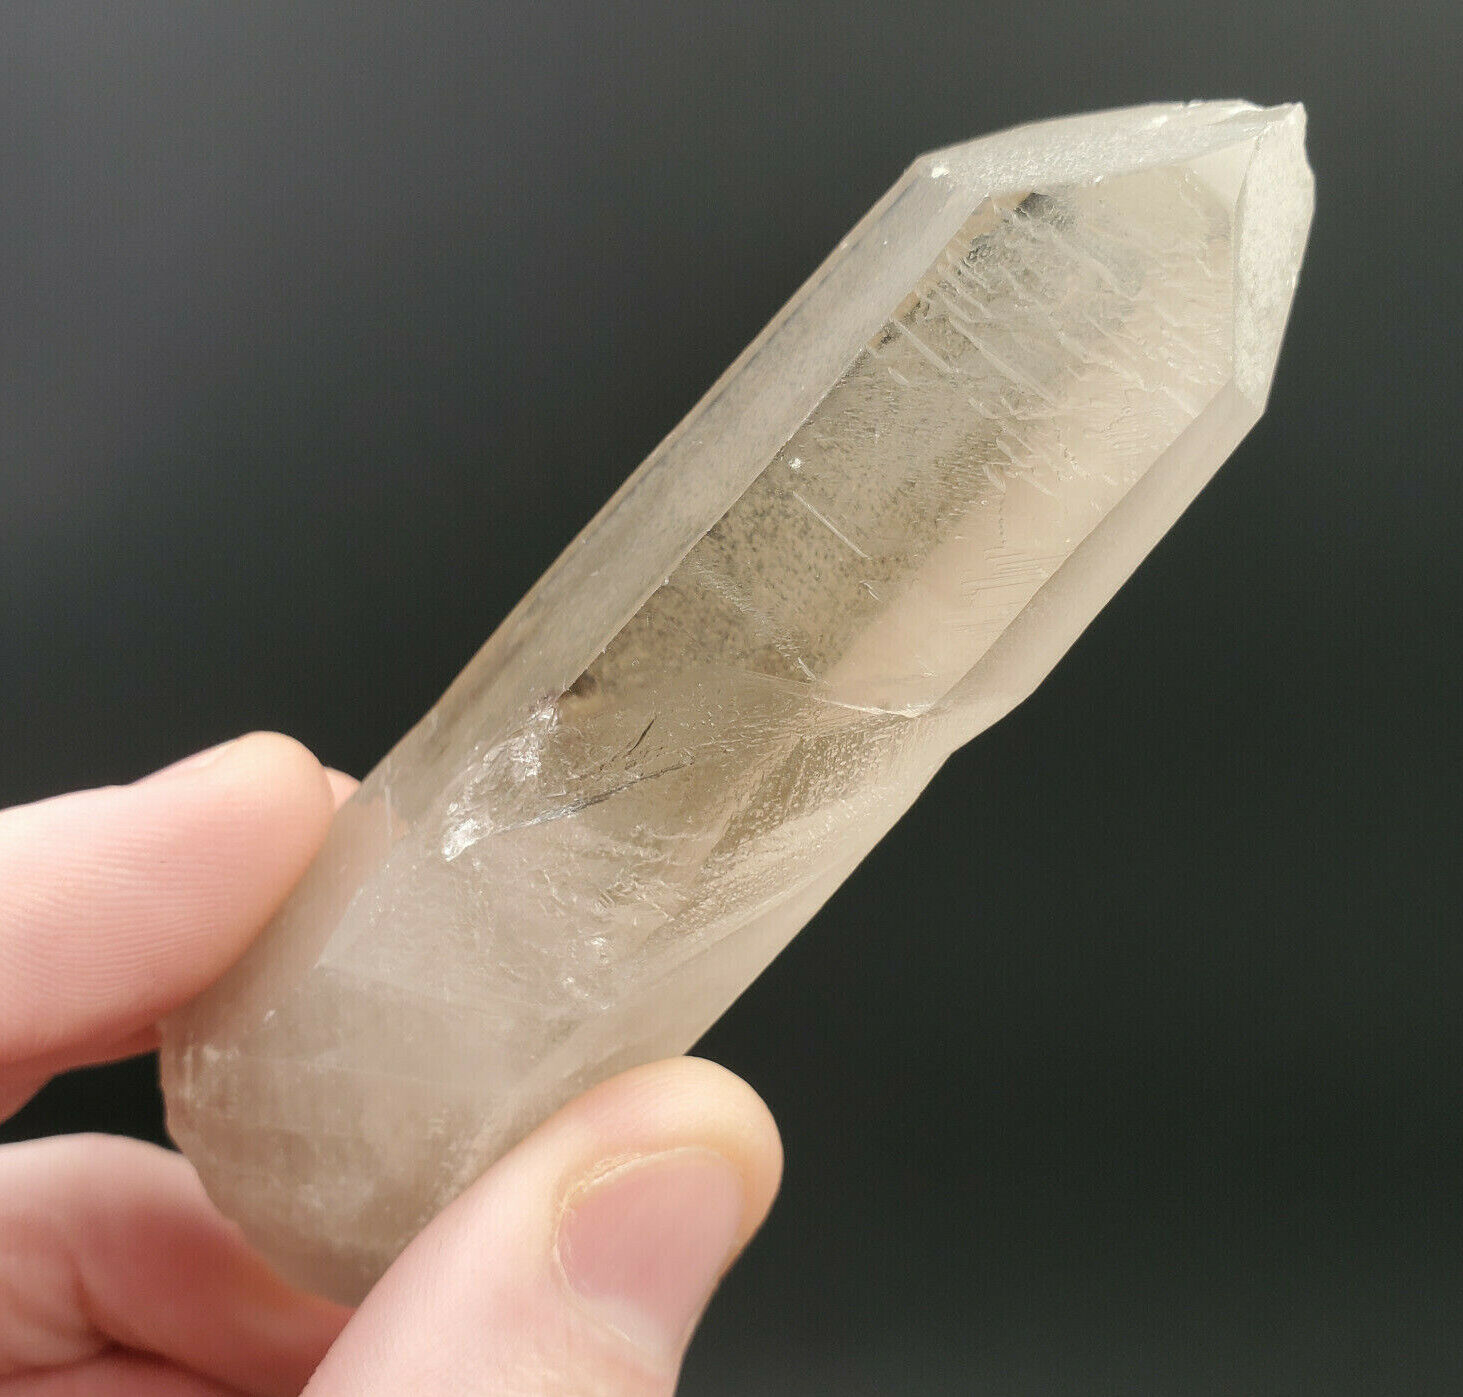 Frosted Smoky Lemurian Seed Quartz Crystal from Brazil, 79.8 grams